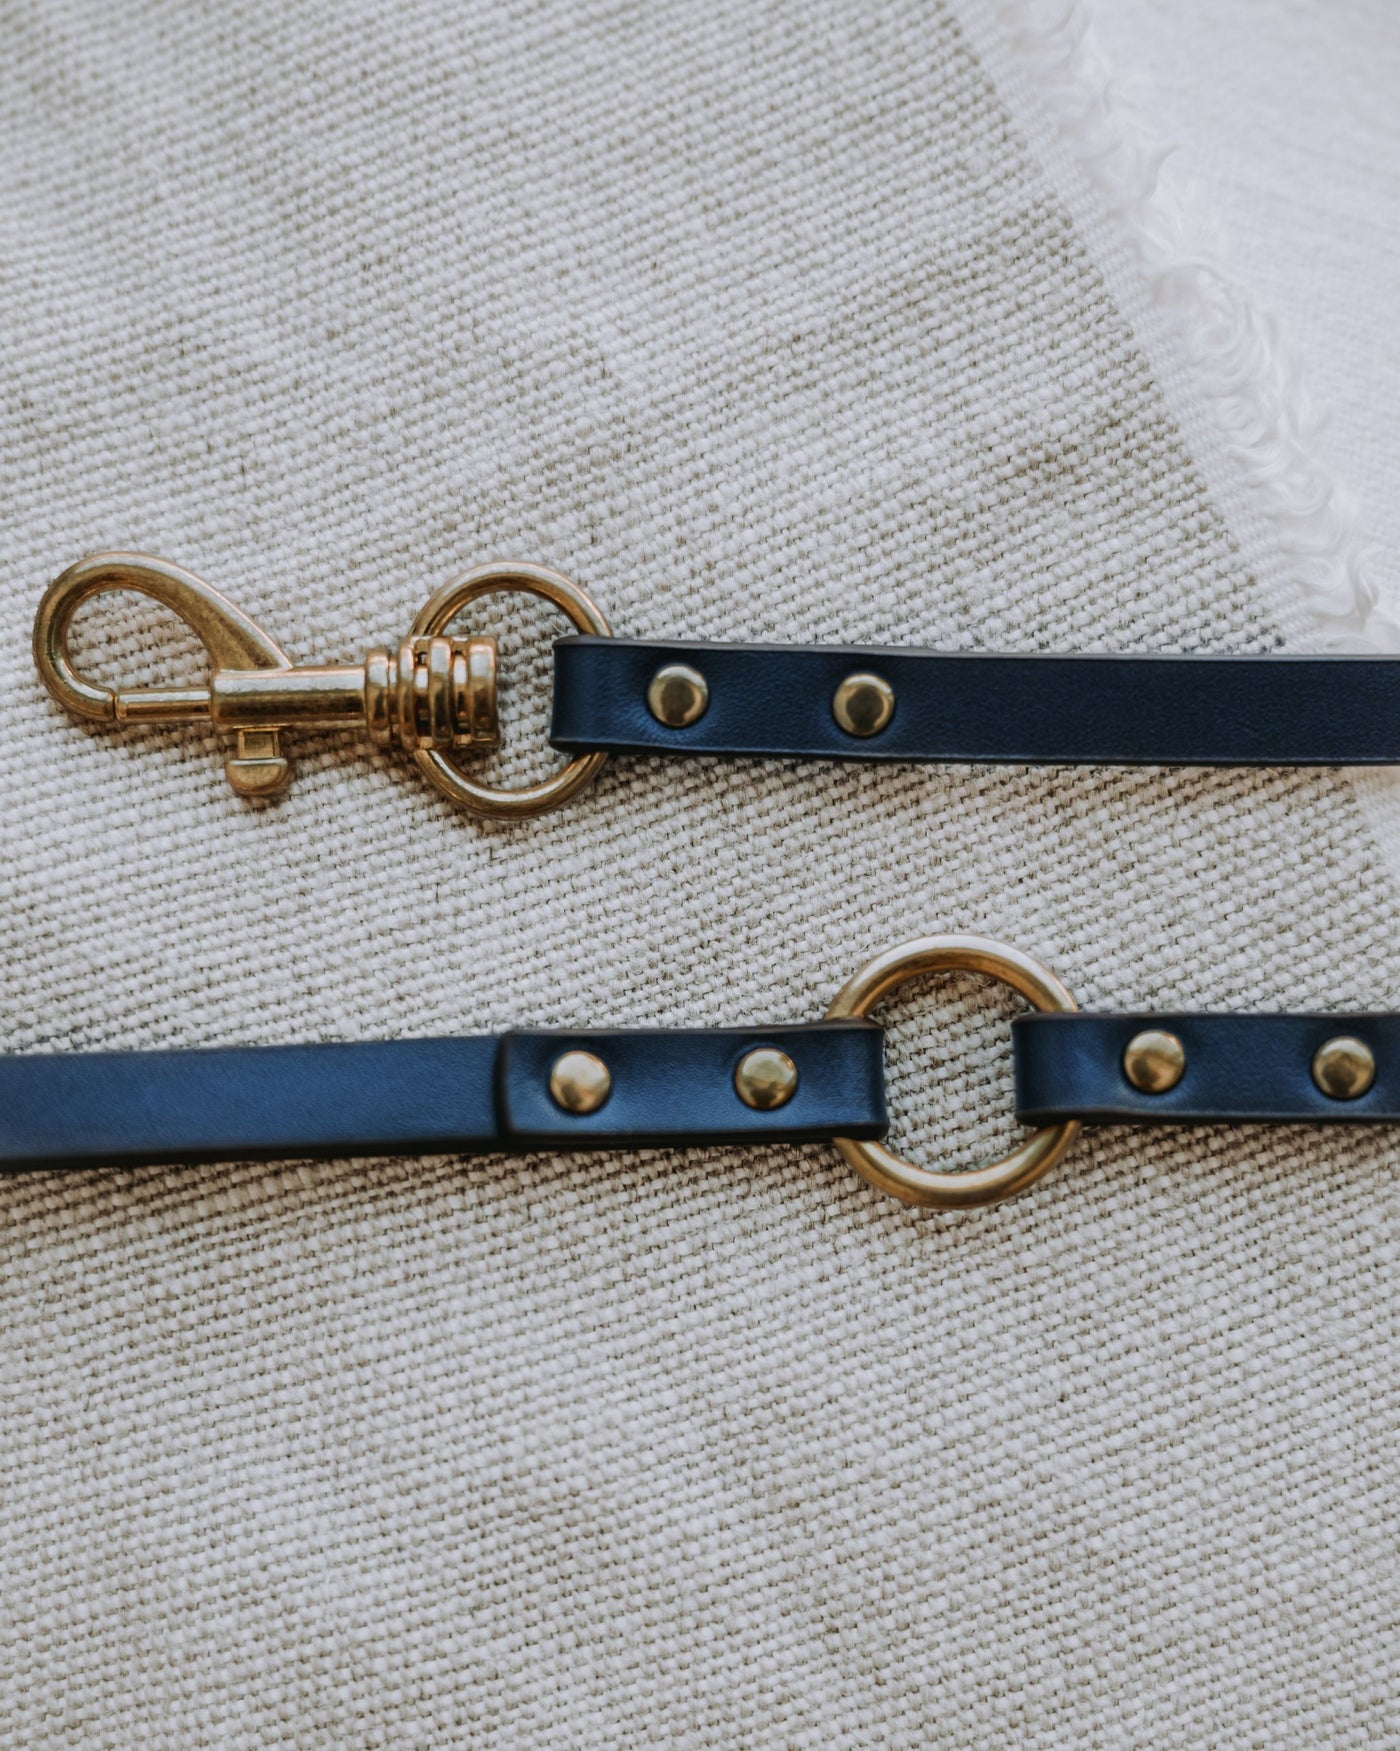 Cannon Navy Leather Leash Product Image Detail